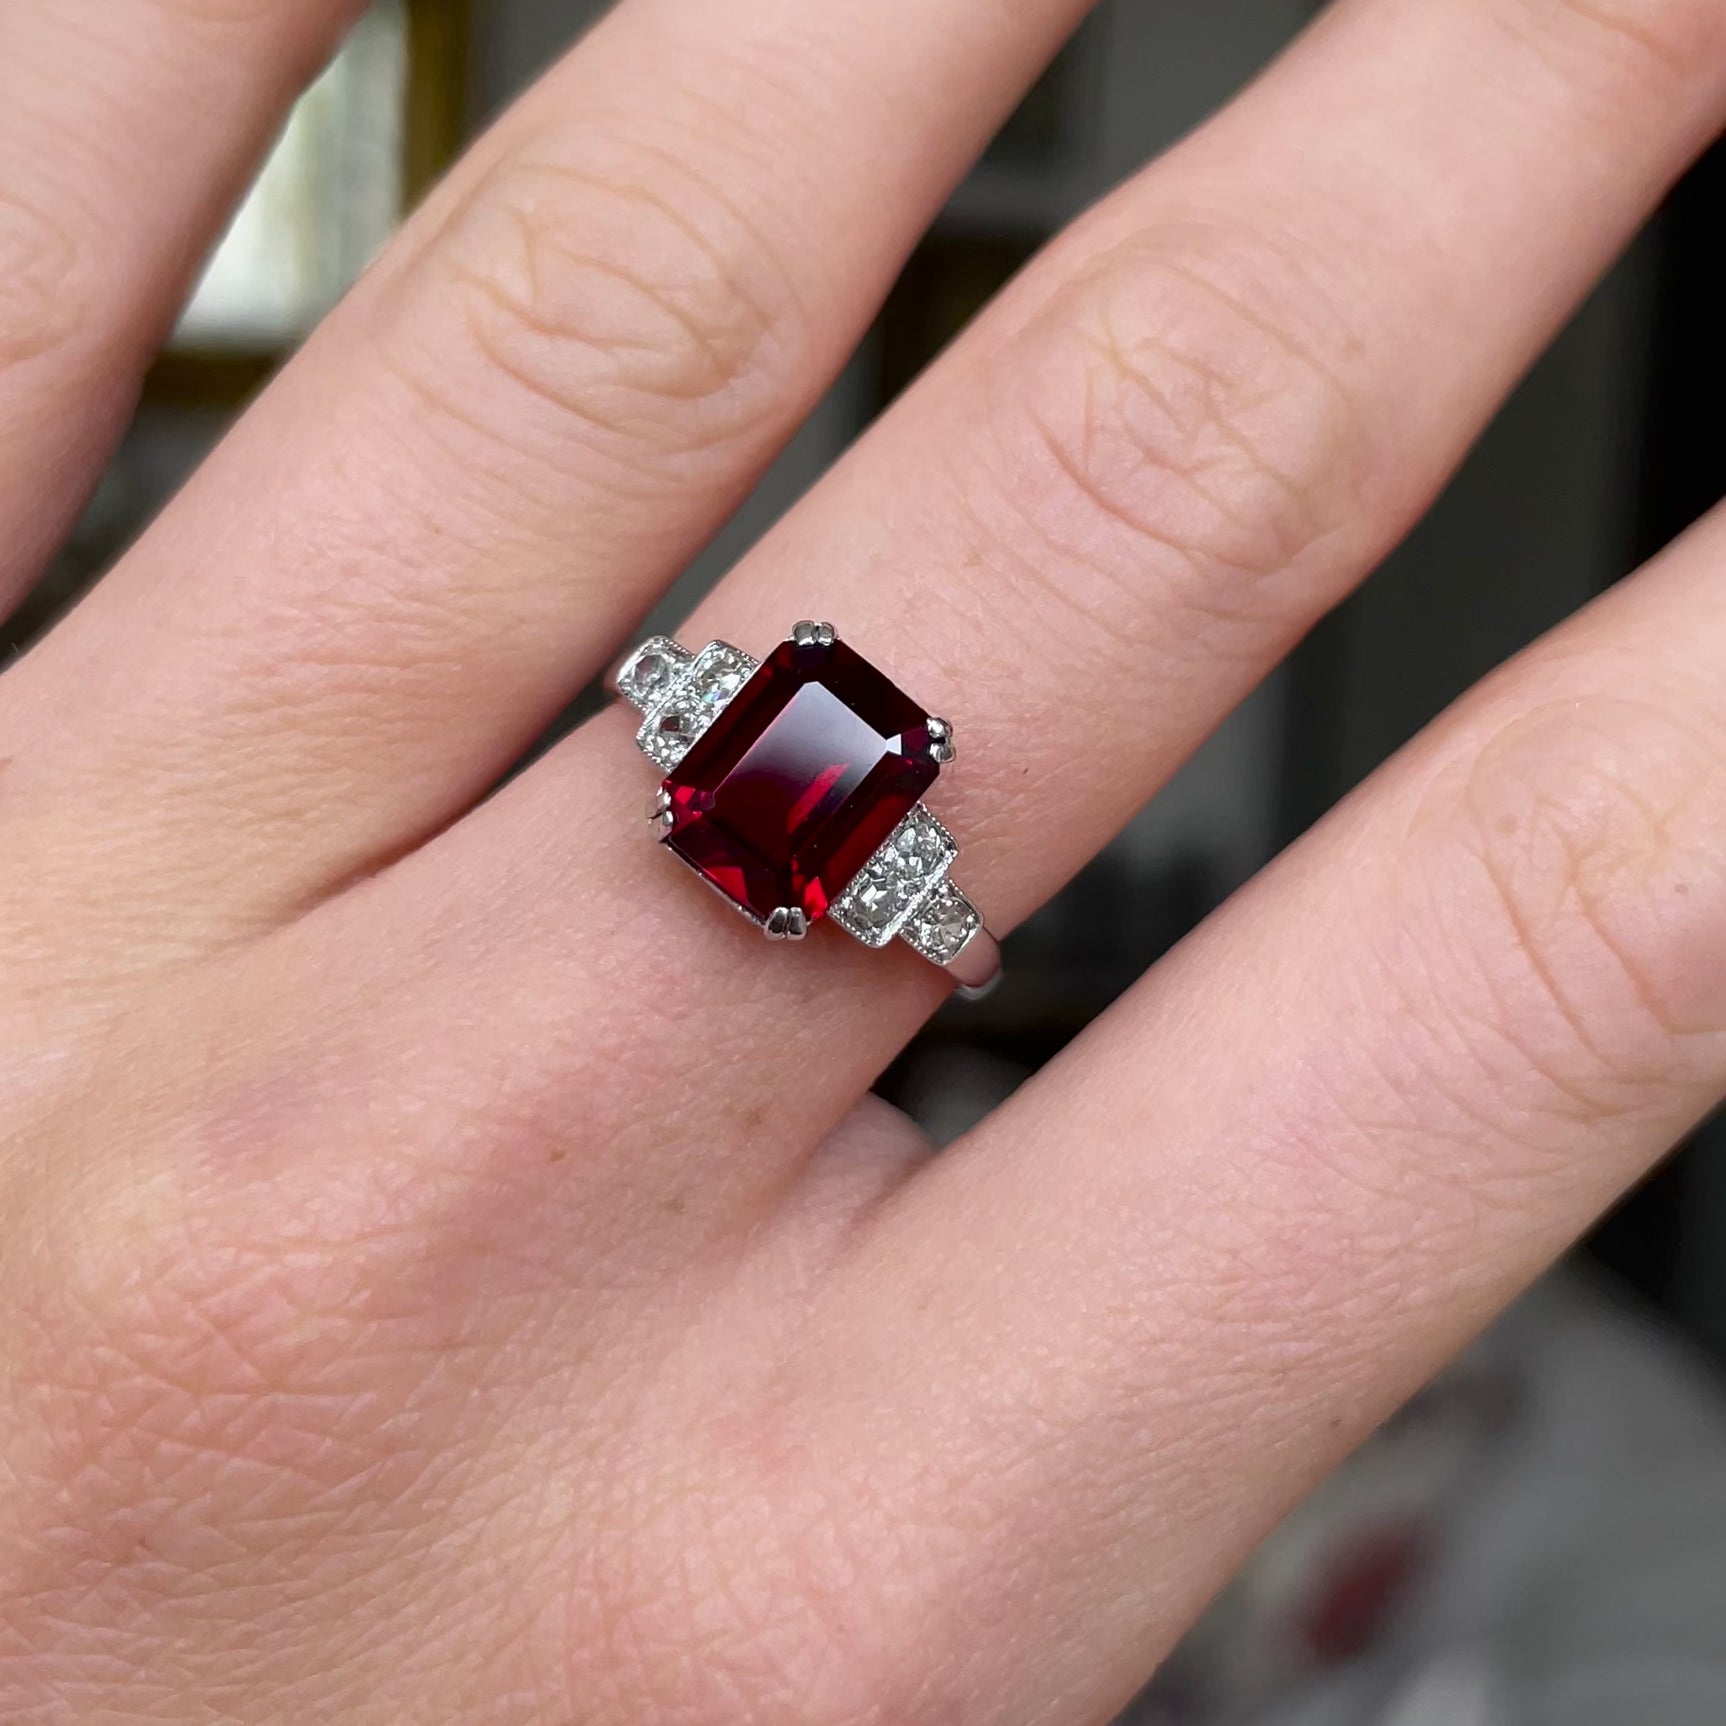 Art Deco garnet and diamond engagement ring, worn on hand and moved around to give perspective.